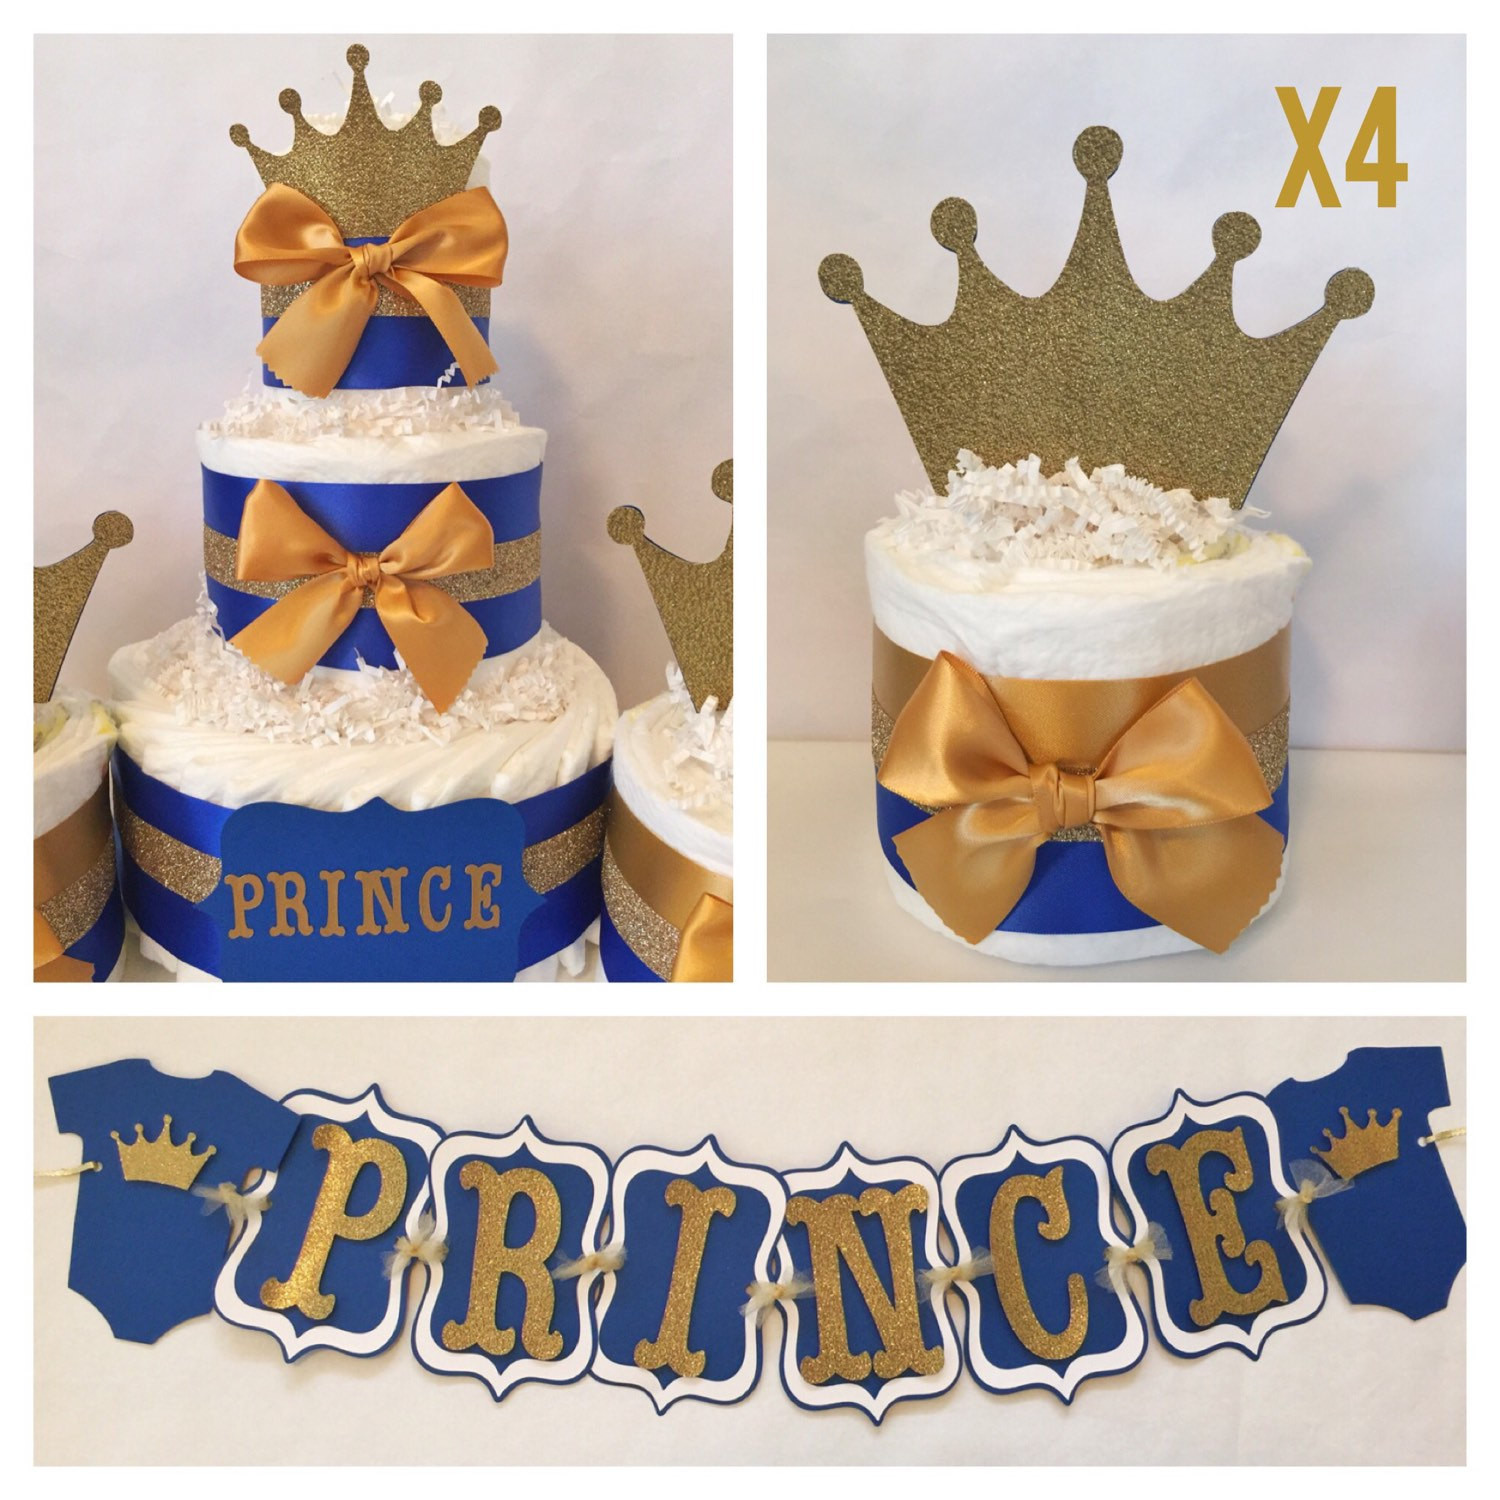 Prince Baby Shower Decoration Ideas
 Prince Baby Shower Party Package in Royal Blue and Gold